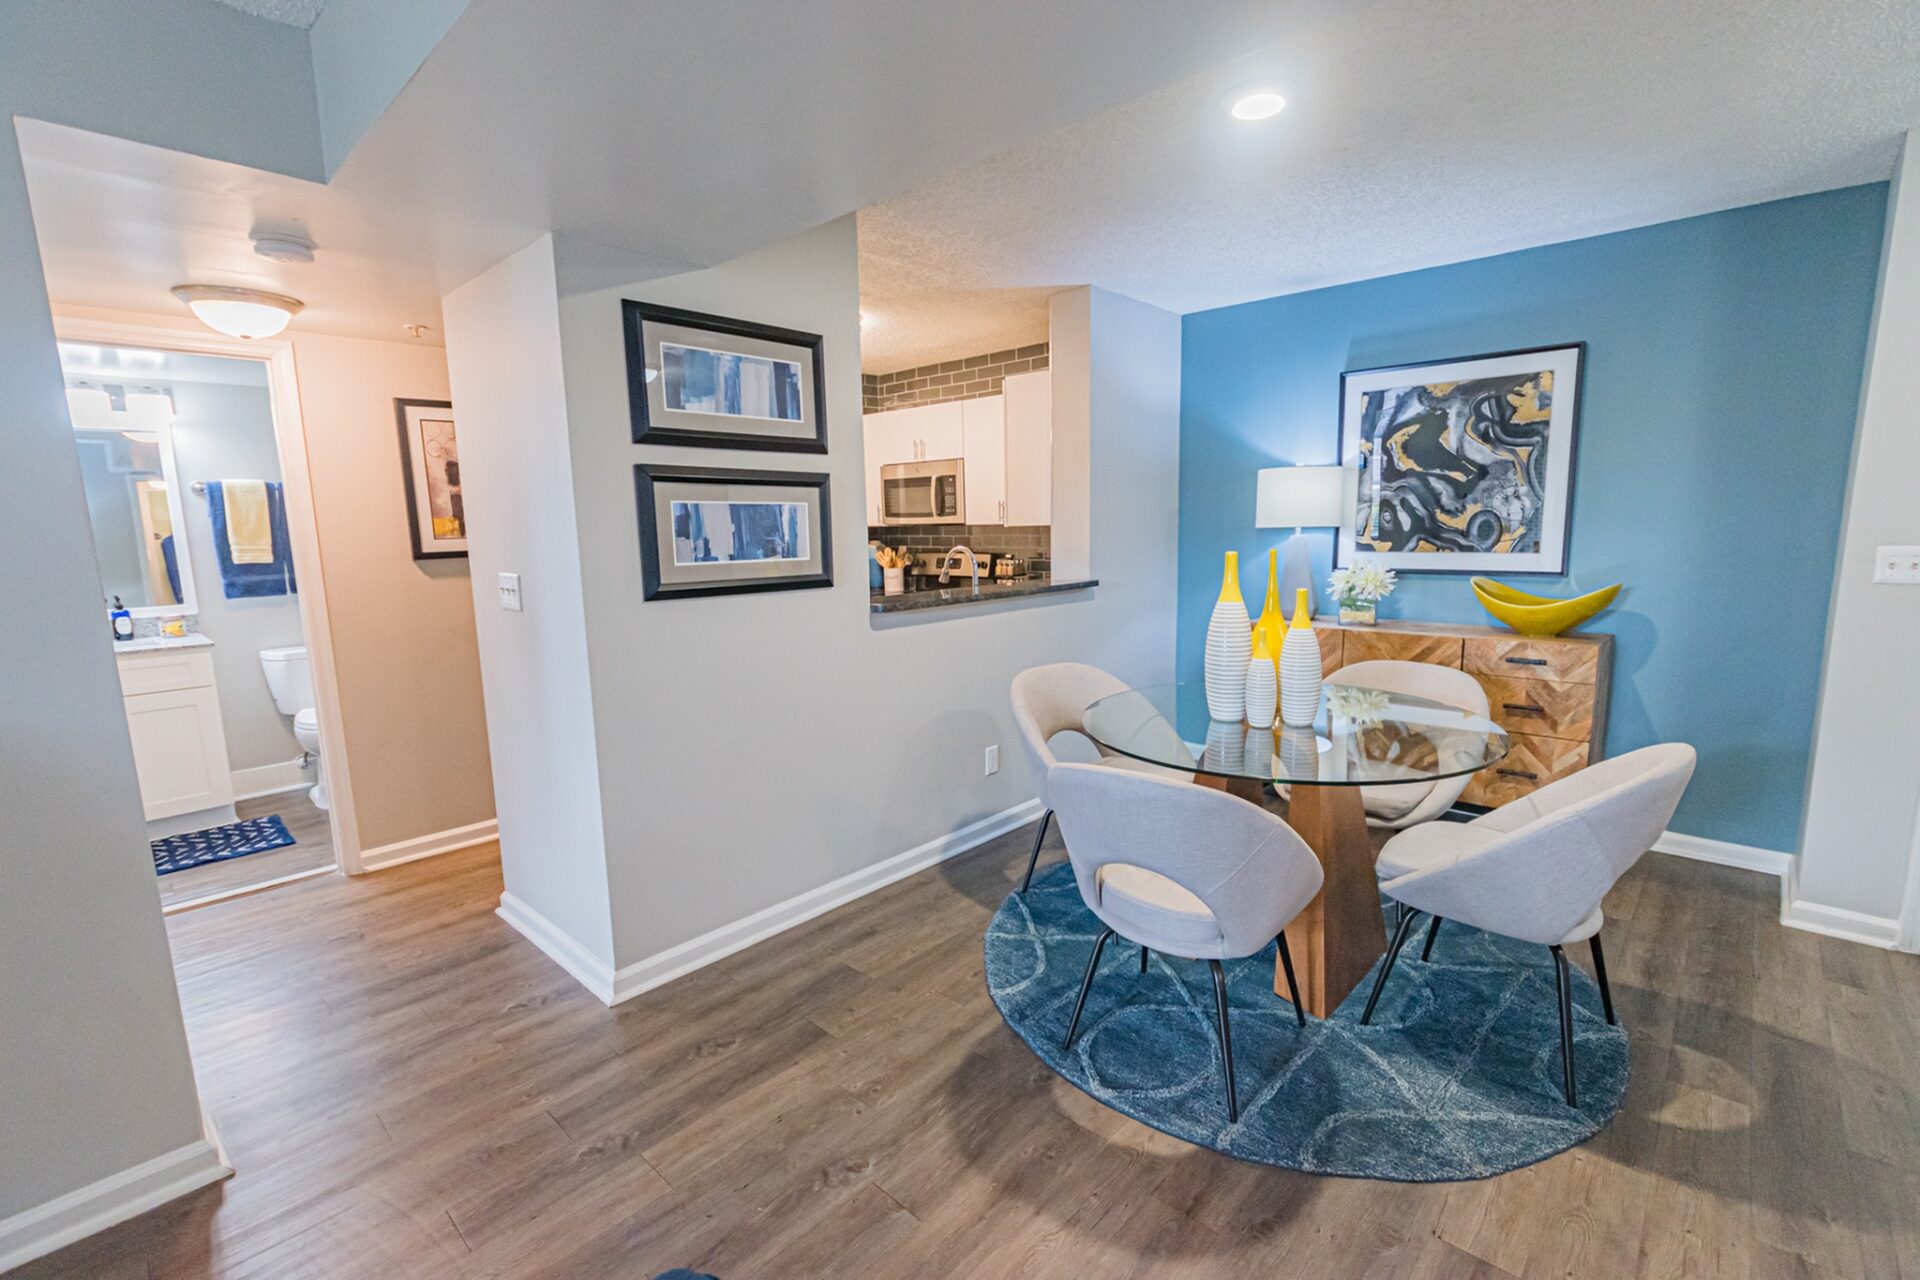 Dining area next to the kitchen in a spacious apartment at Beach Walk at Sheridan.